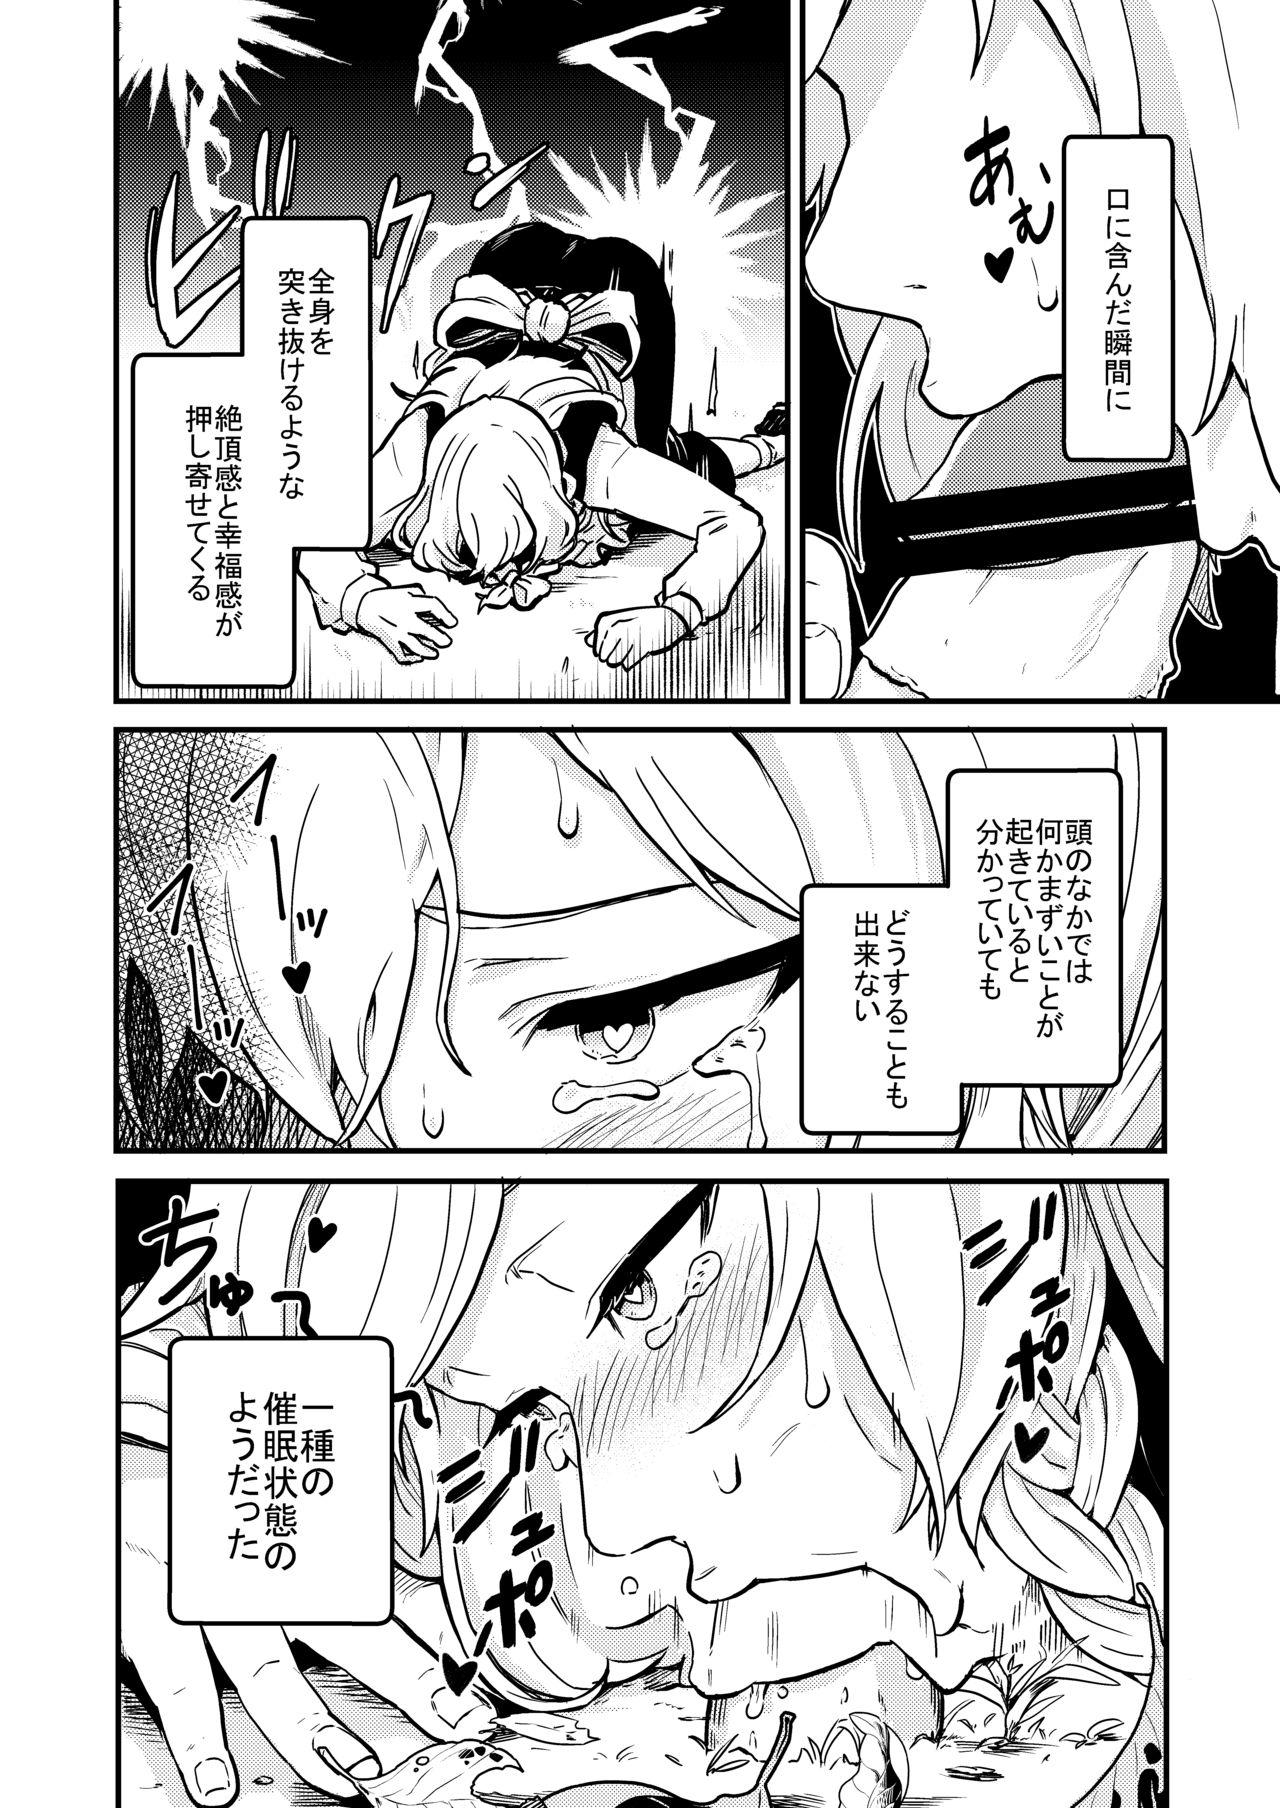 Missionary Porn Marisa Expansion Burst - Touhou project Wank - Page 5